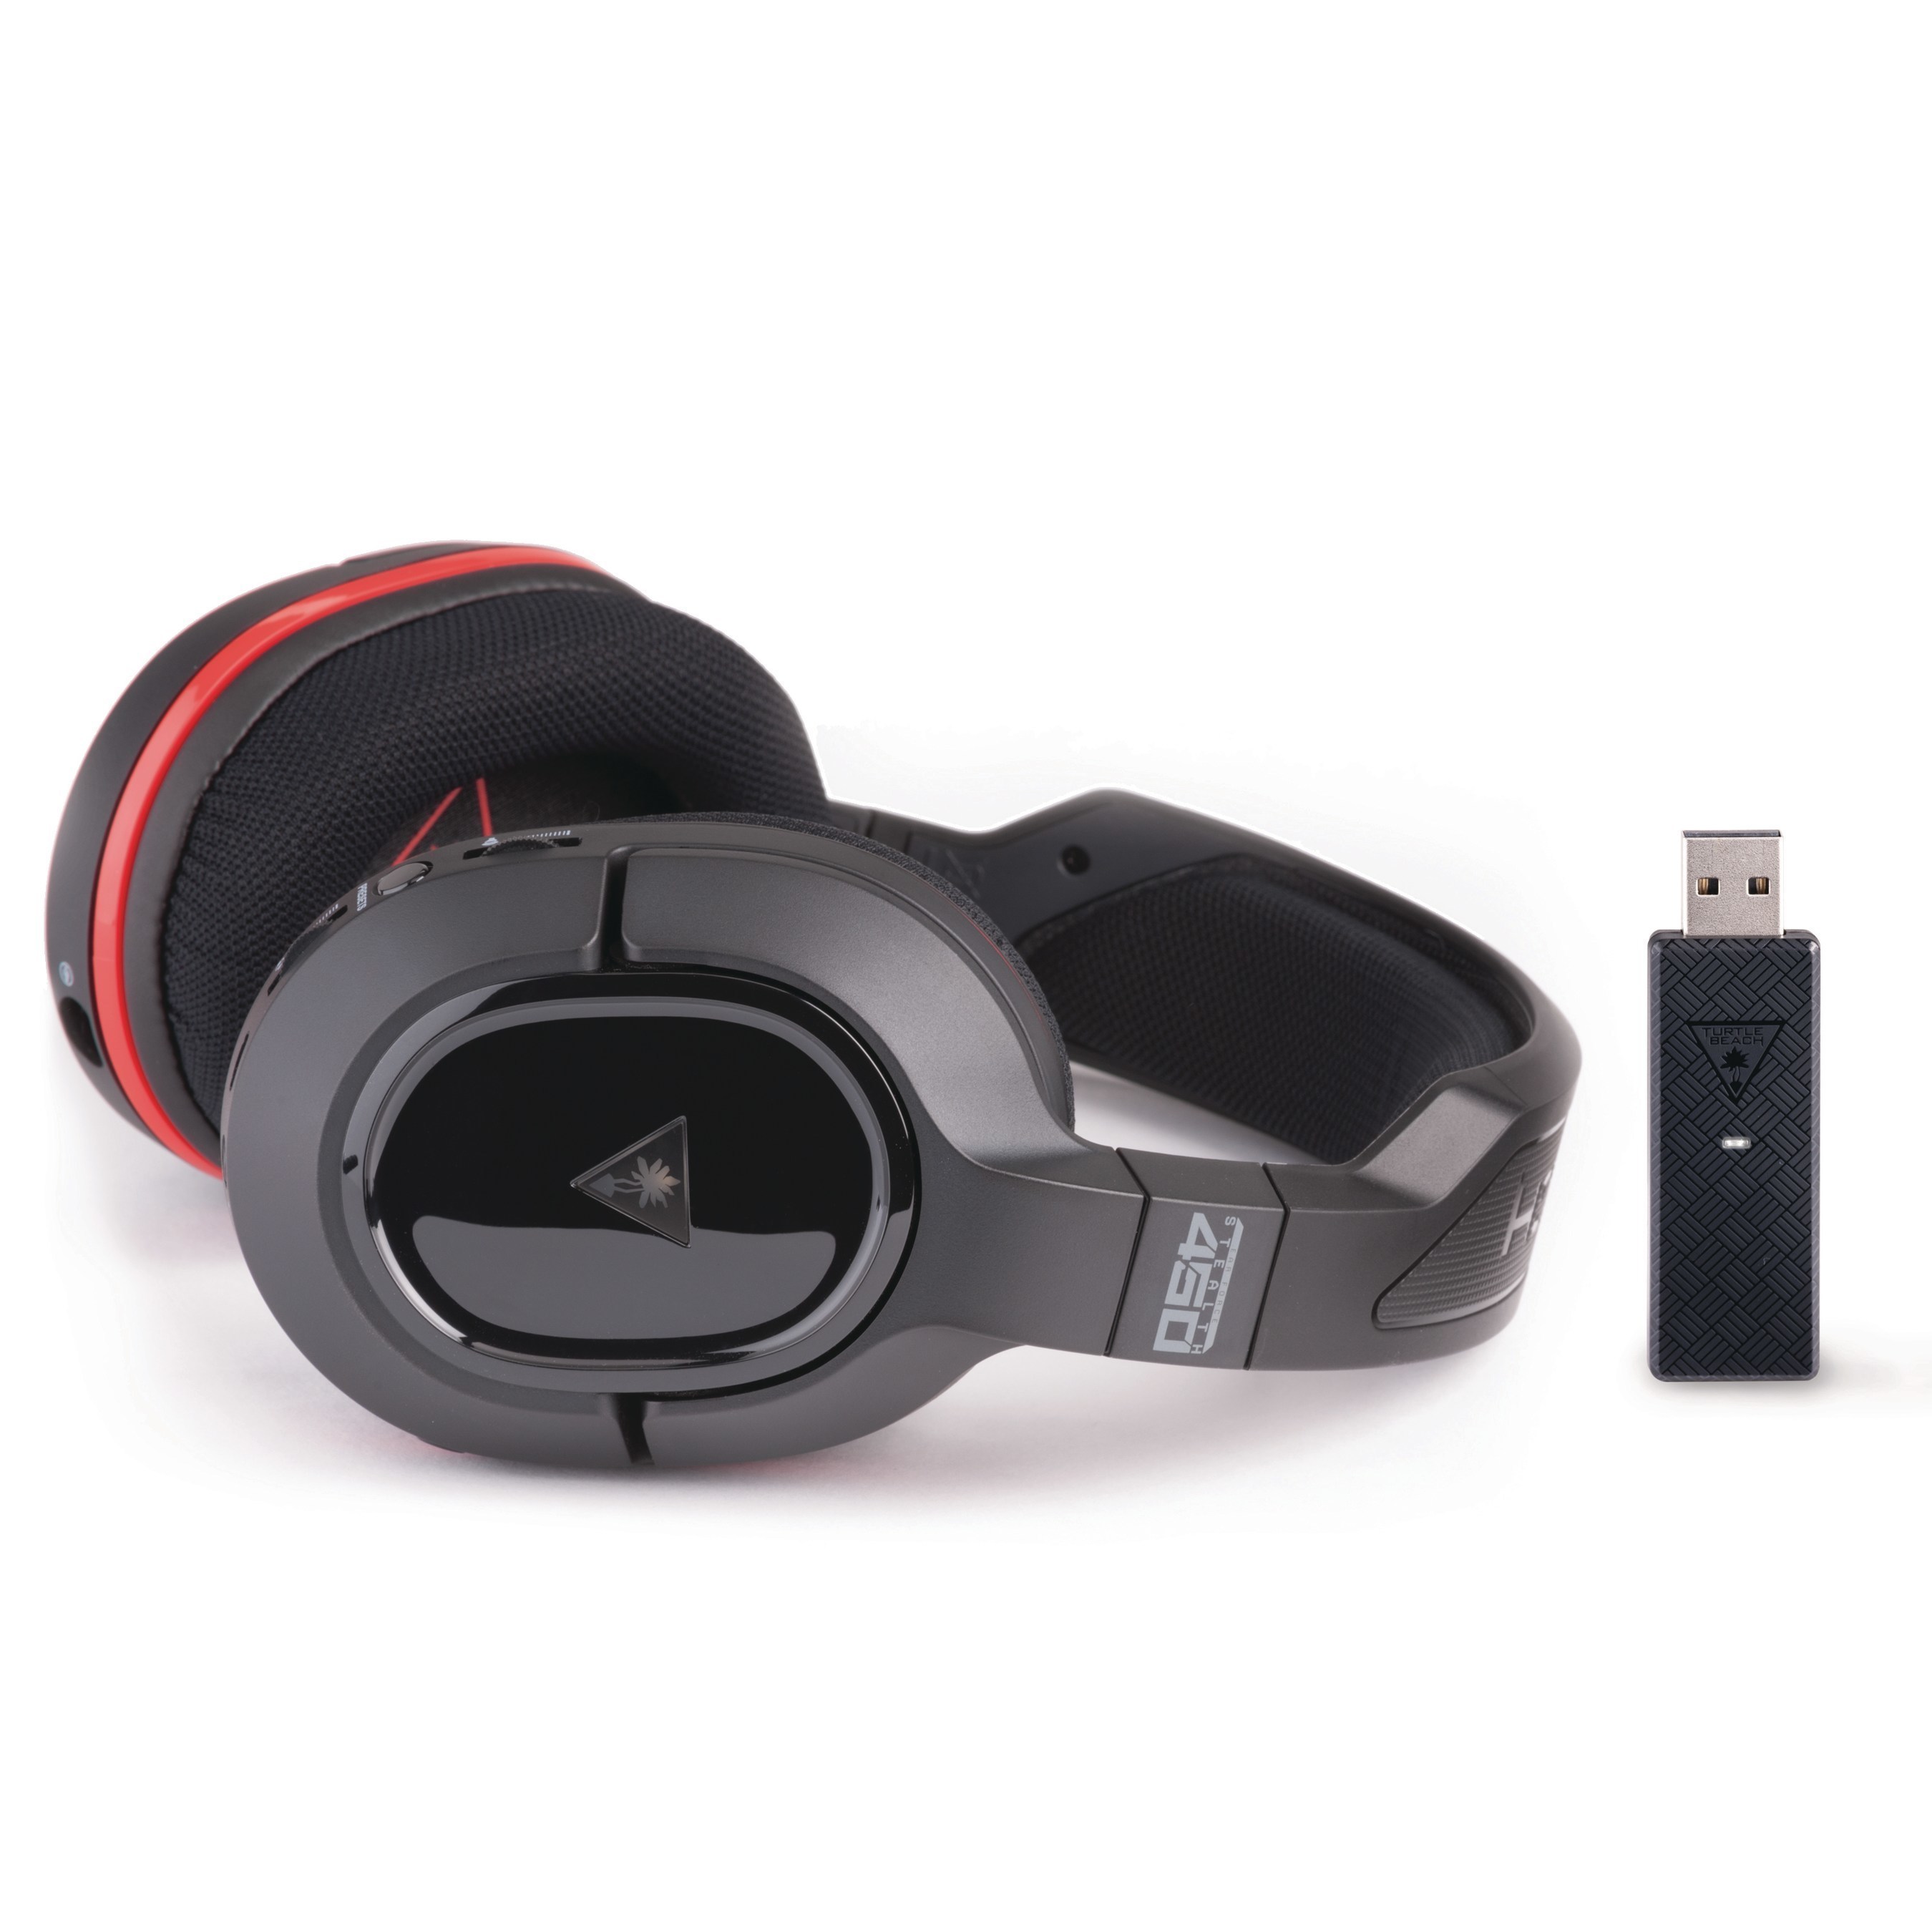 Turtle Beach Ear Force Stealth 450 Fully Wireless PC Gaming Headset with DTS Headphone:X 7.1 Surround Sound 